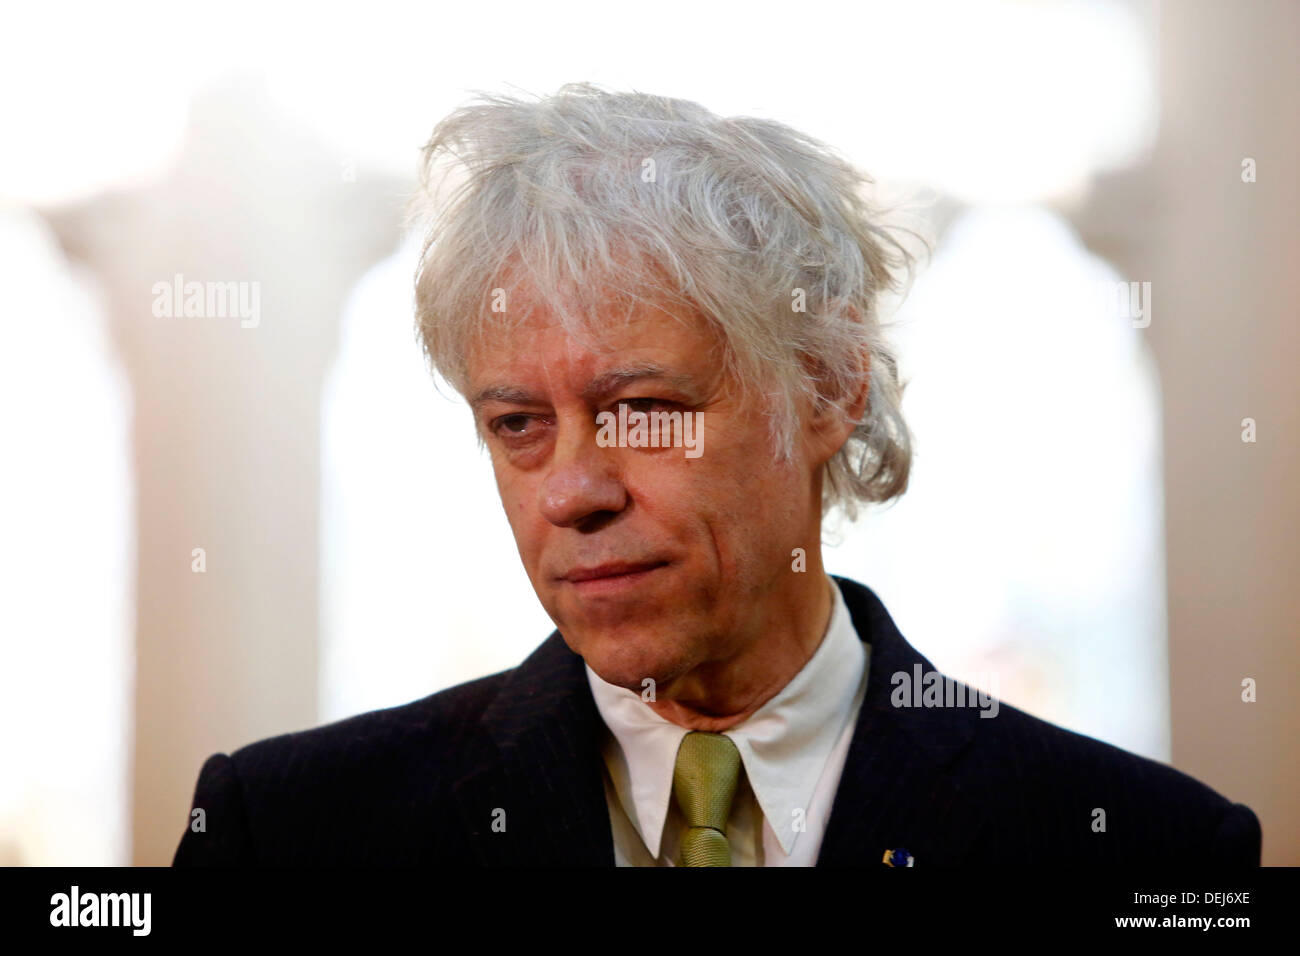 Irish musician Sir Bob Geldof attends a ceremony where he received the Freedom of the City of London certificate at the Guildhal Stock Photo